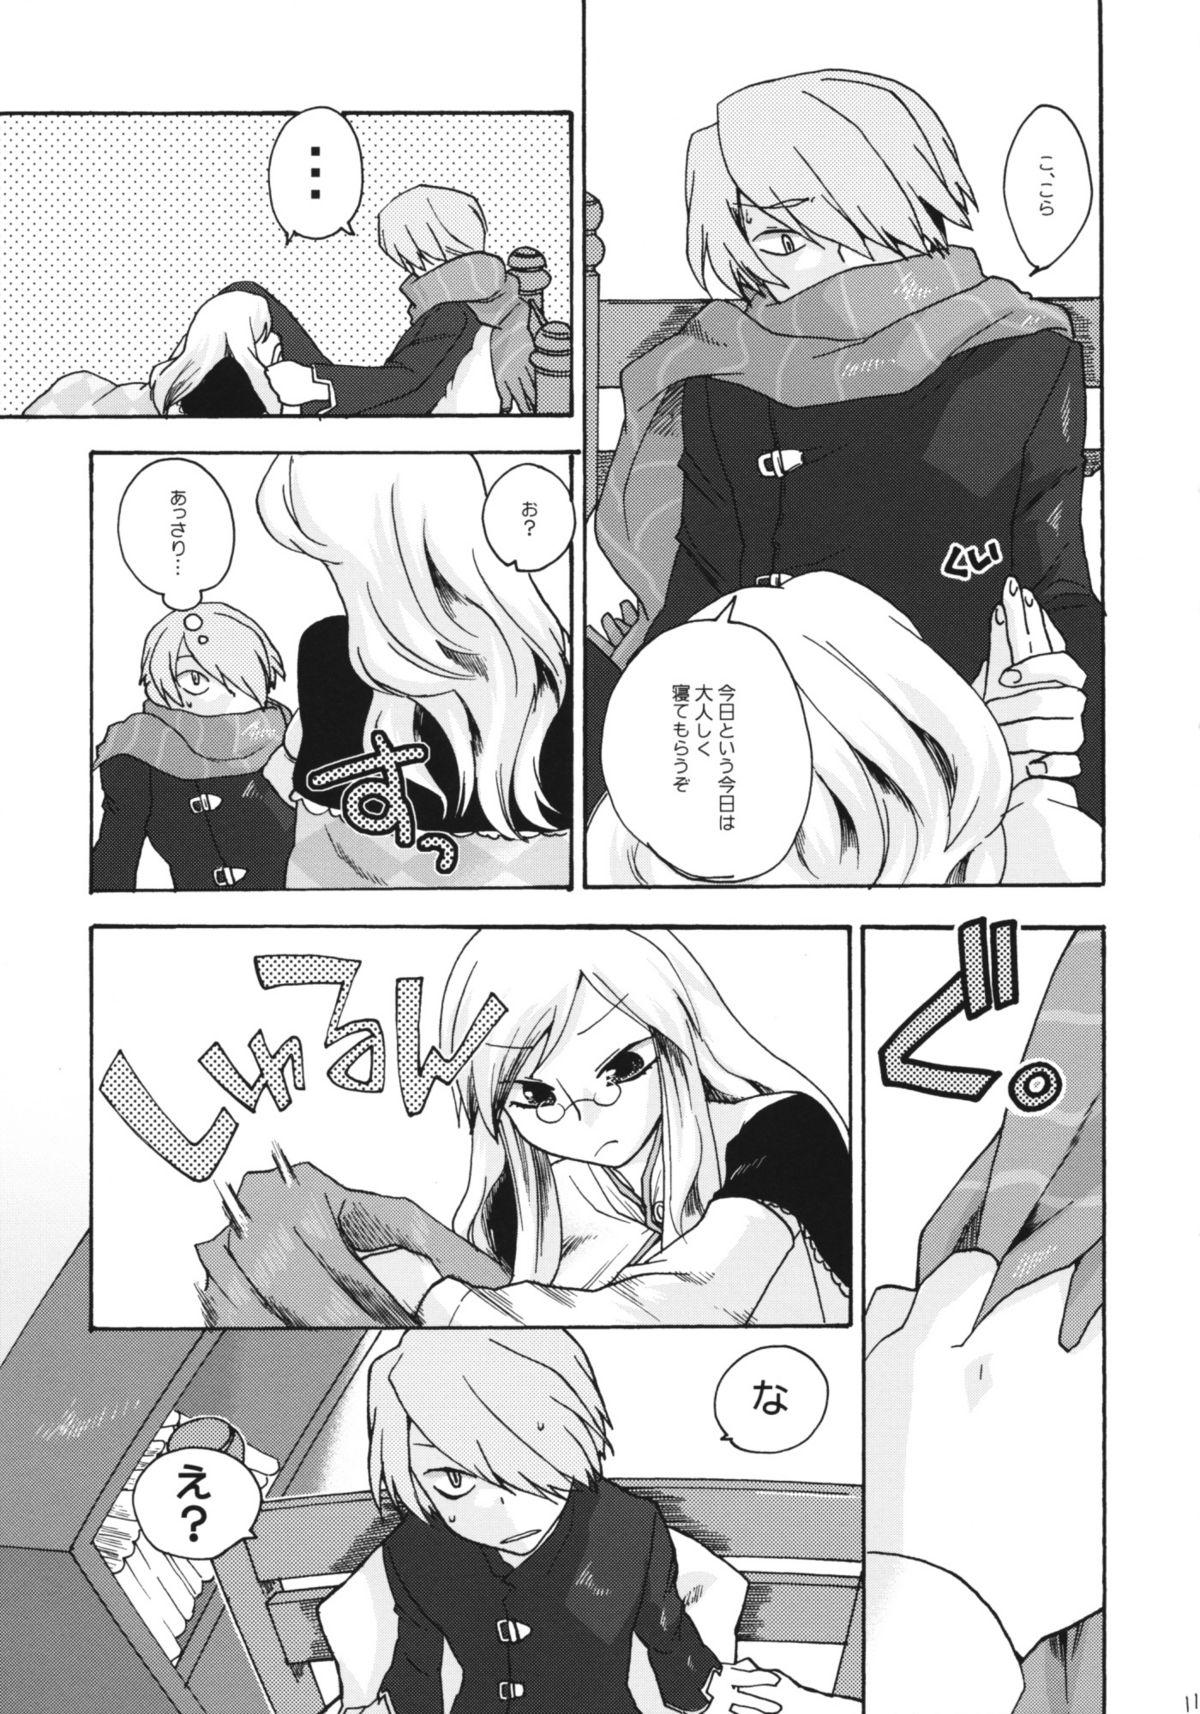 Hugetits In You And Me - 7th dragon Tgirls - Page 10